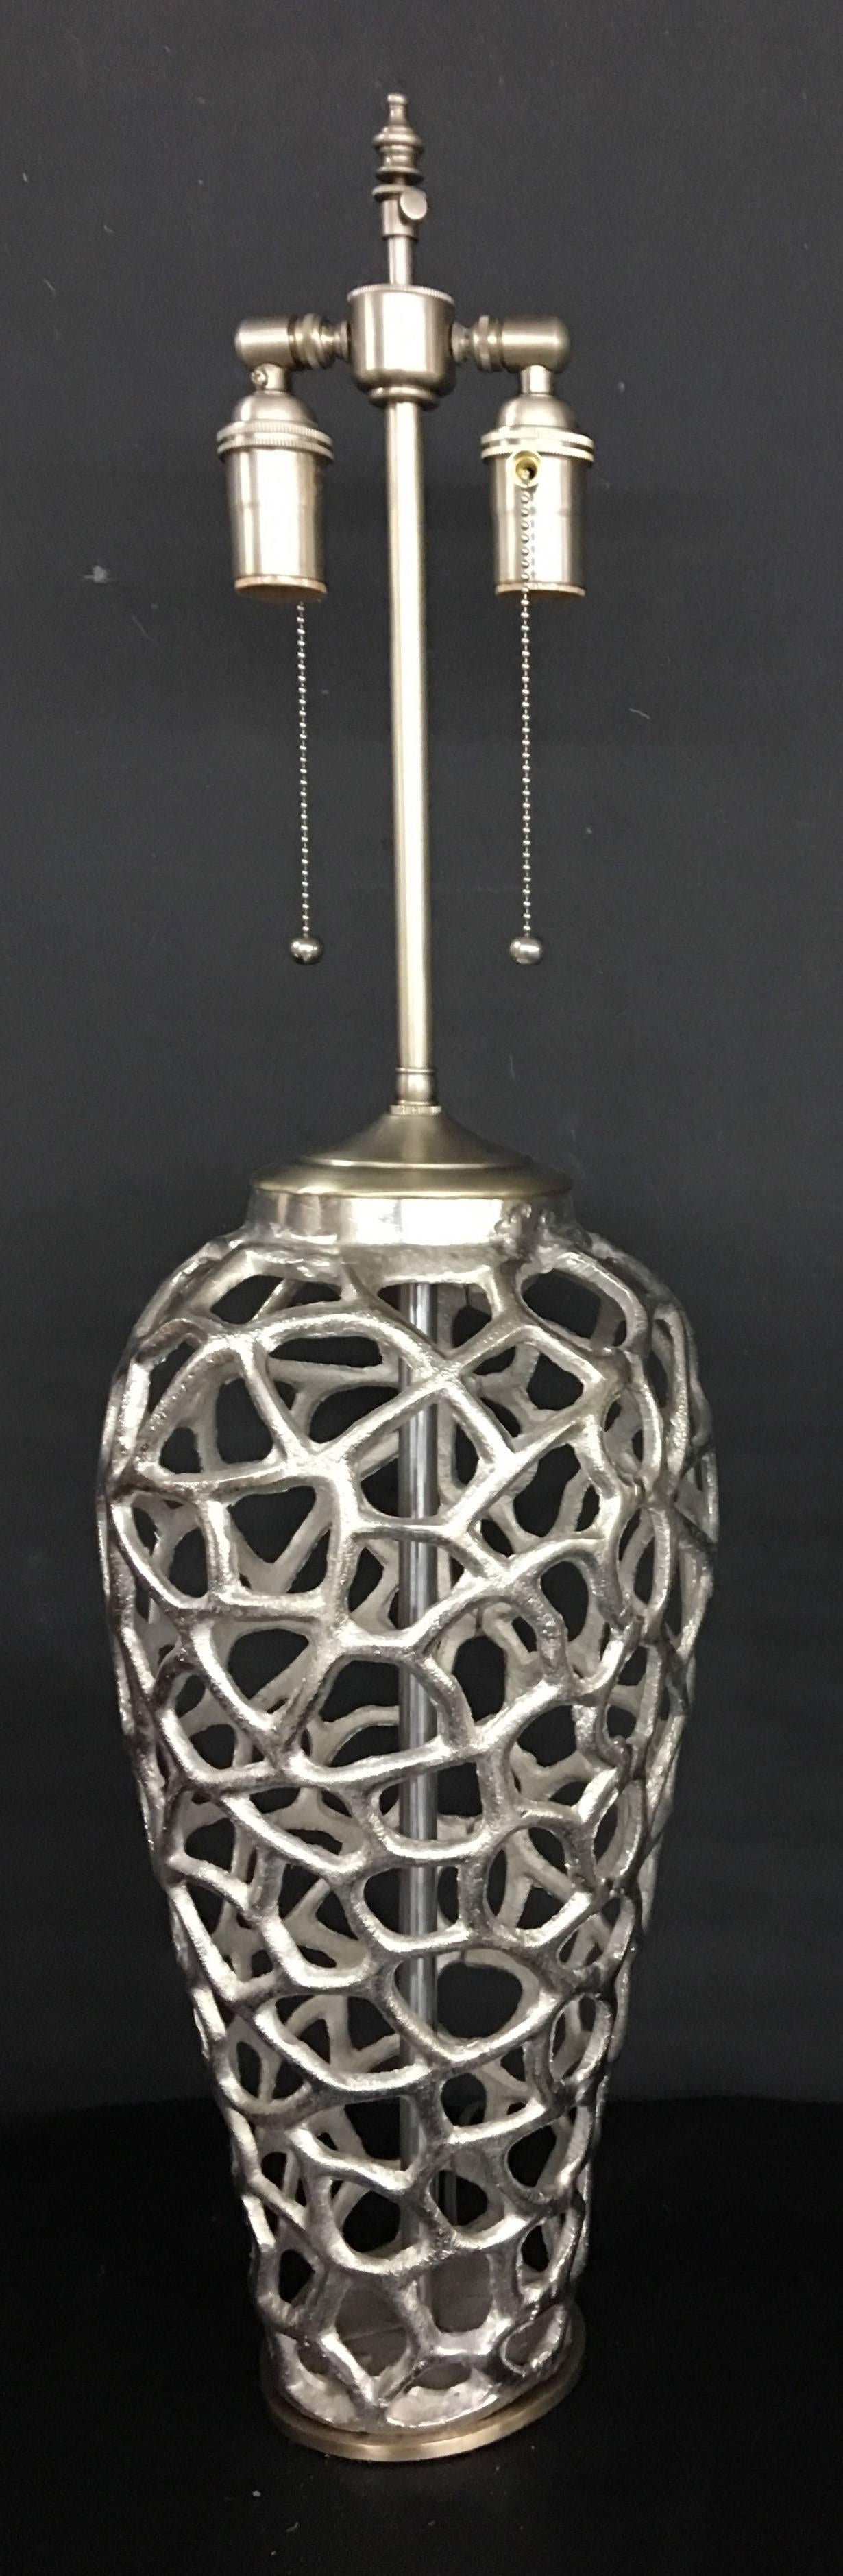 Unique newly wired pair of large cast metal vessels with lamp application. The hardware is brushed Nickel and comprises dual, individually controlled sockets. The vessel height is 18.5